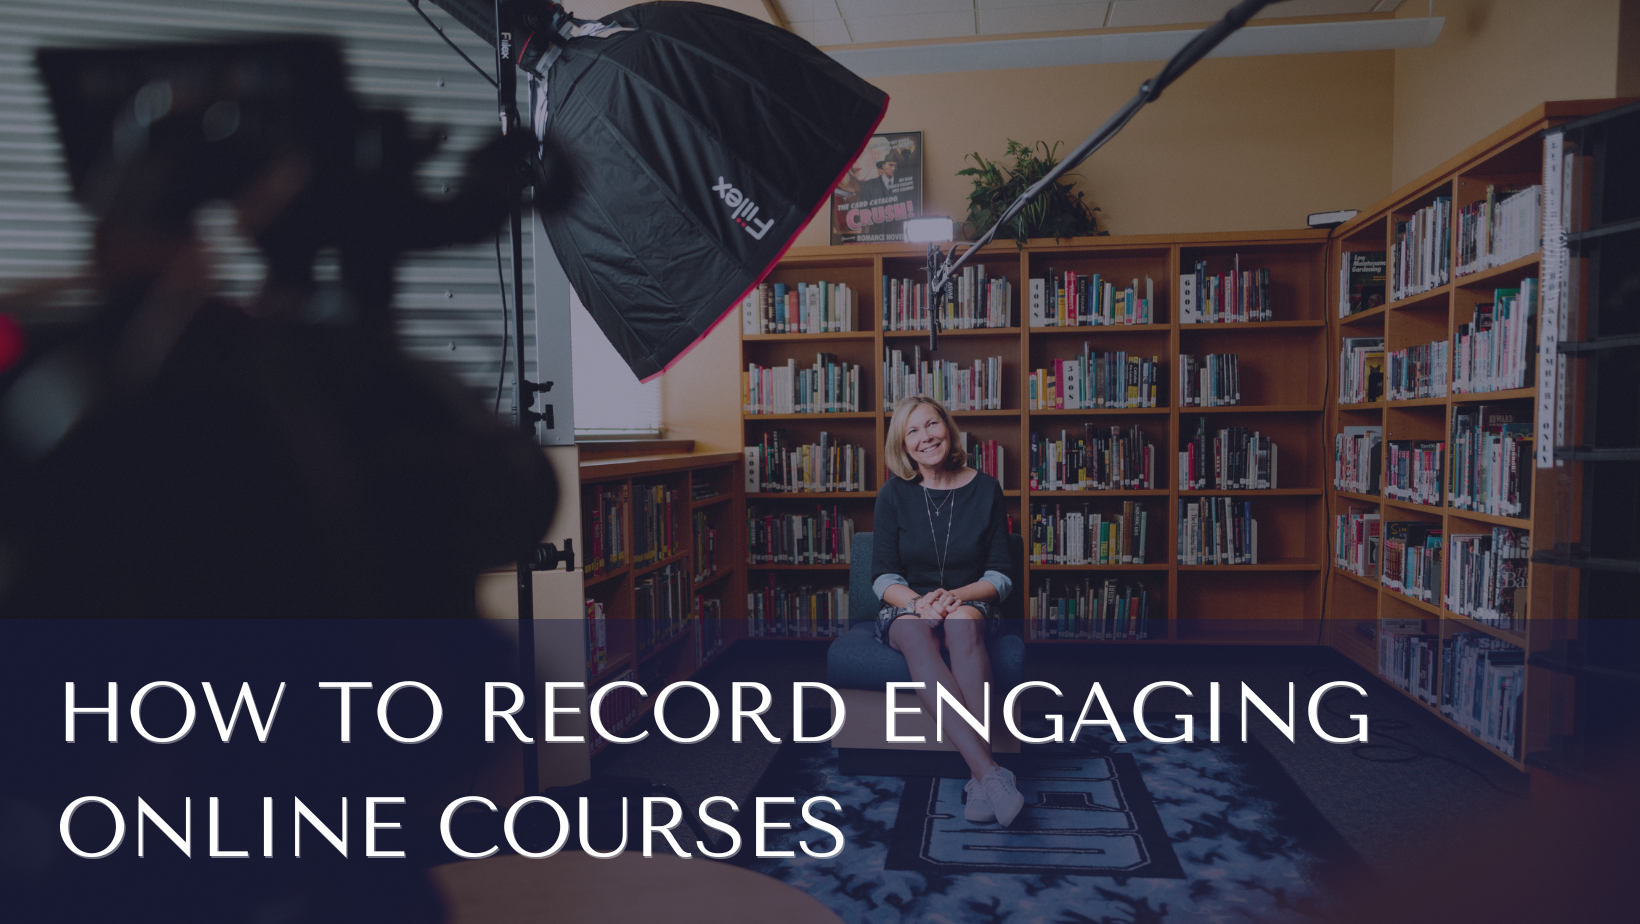 You are currently viewing Recording Engaging Online Courses: Tips from a Man Behind the Camera